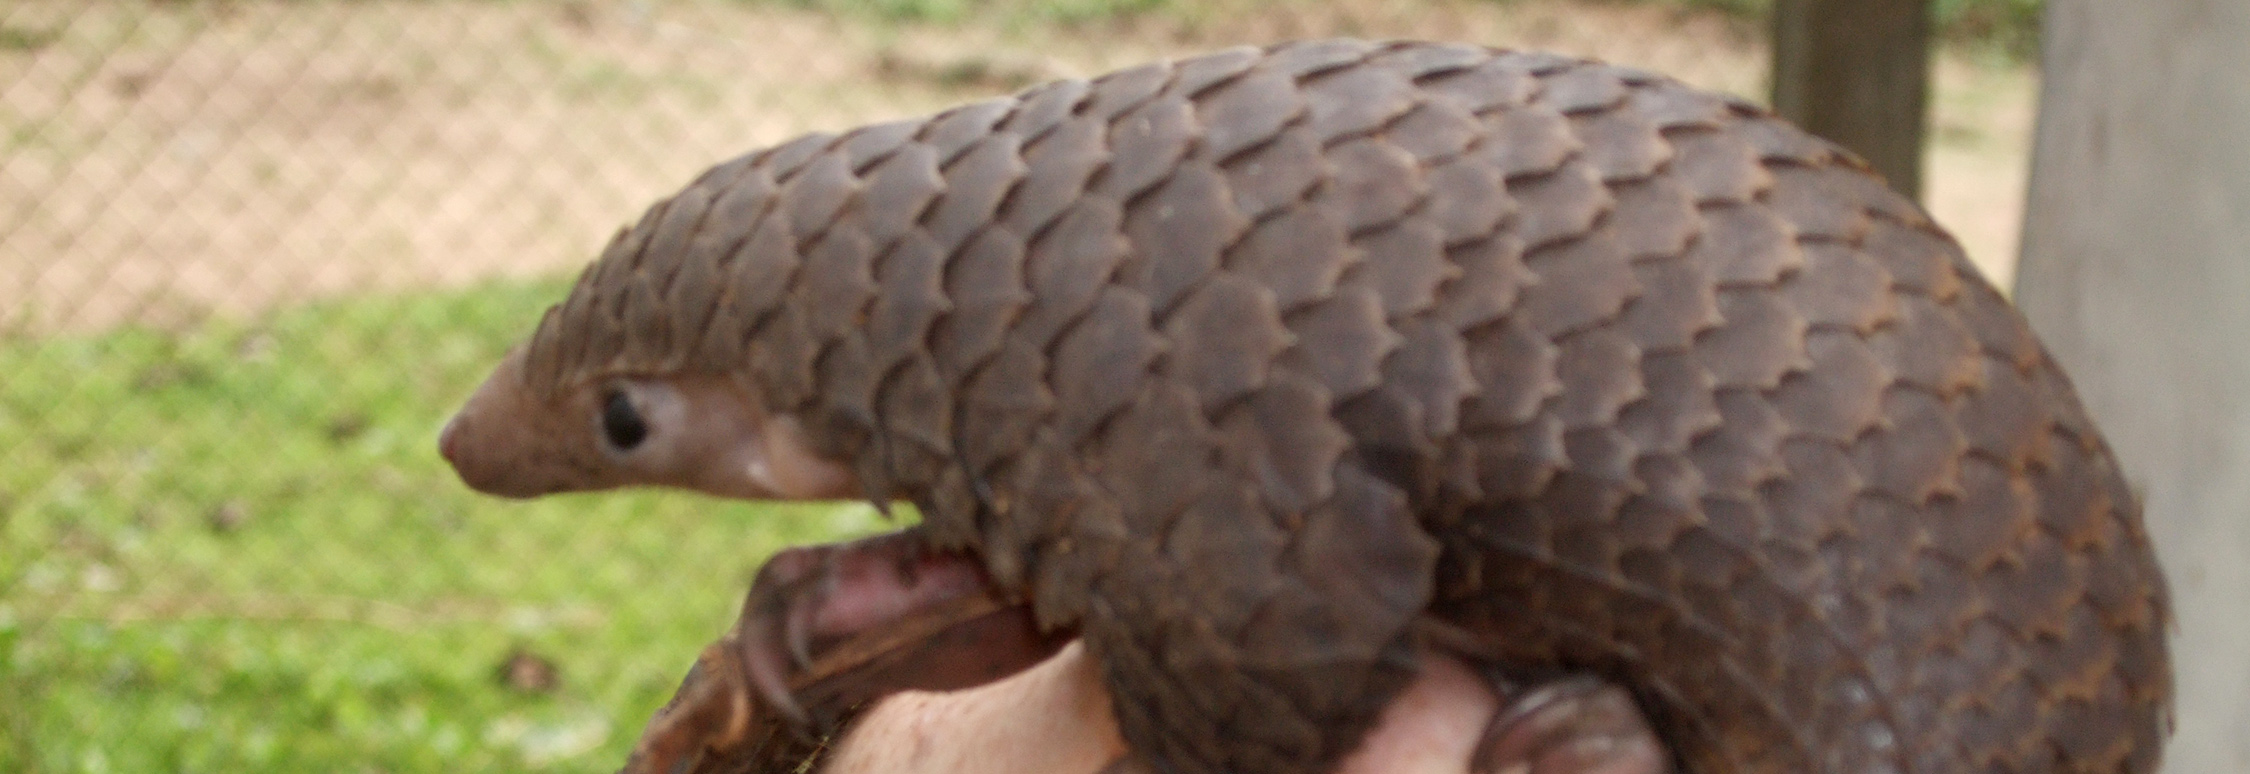 Tree pangolin

By Valerius Tygart - Own work, CC BY-SA 3.0, https://commons.wikimedia.org/w/index.php?curid=5613187

